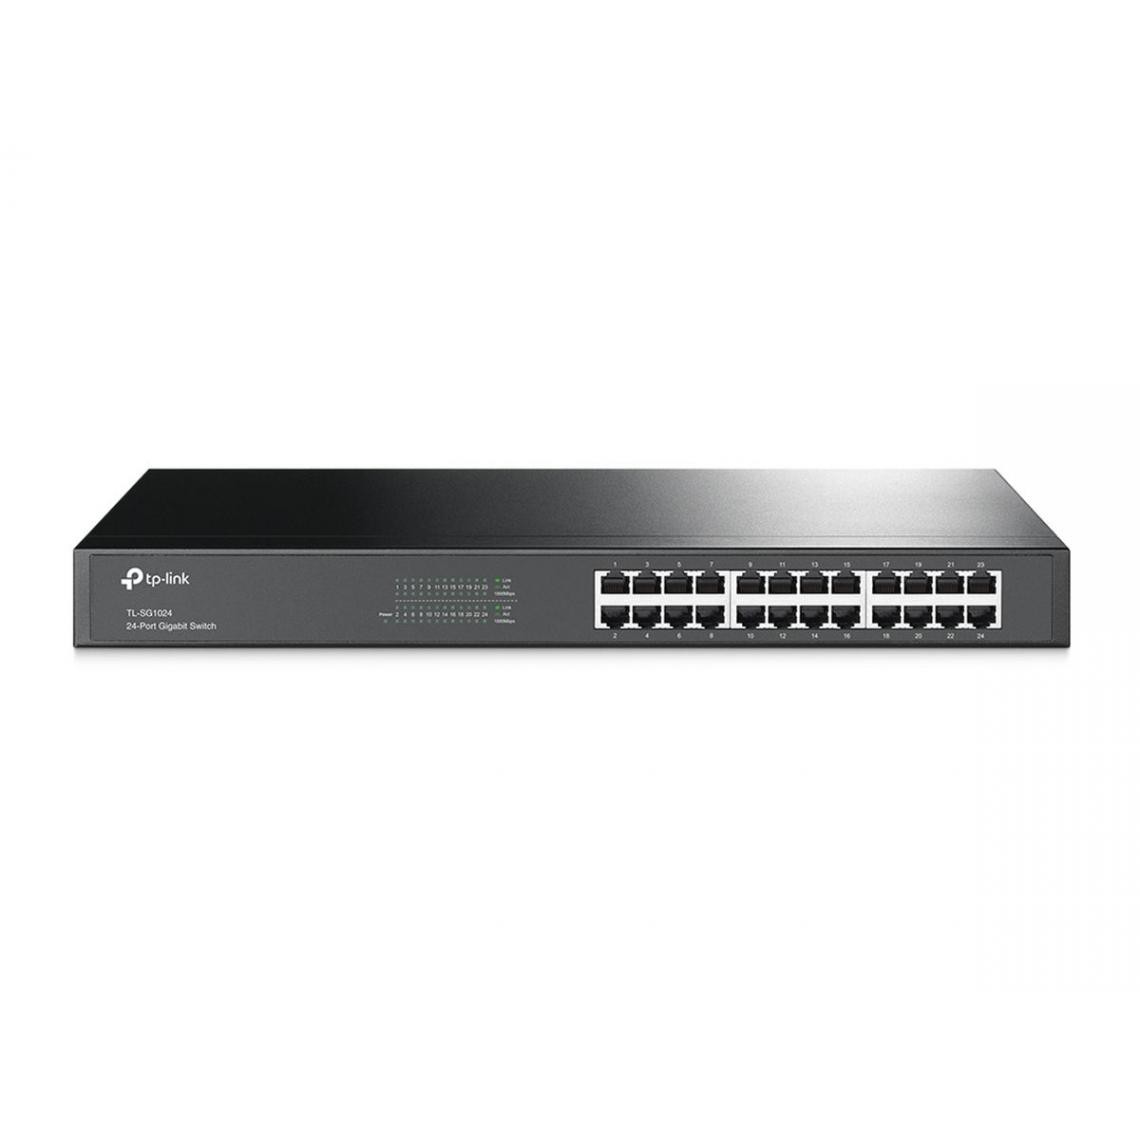 TP-LINK - Switch 24 ports TL-SG1024 - Switch